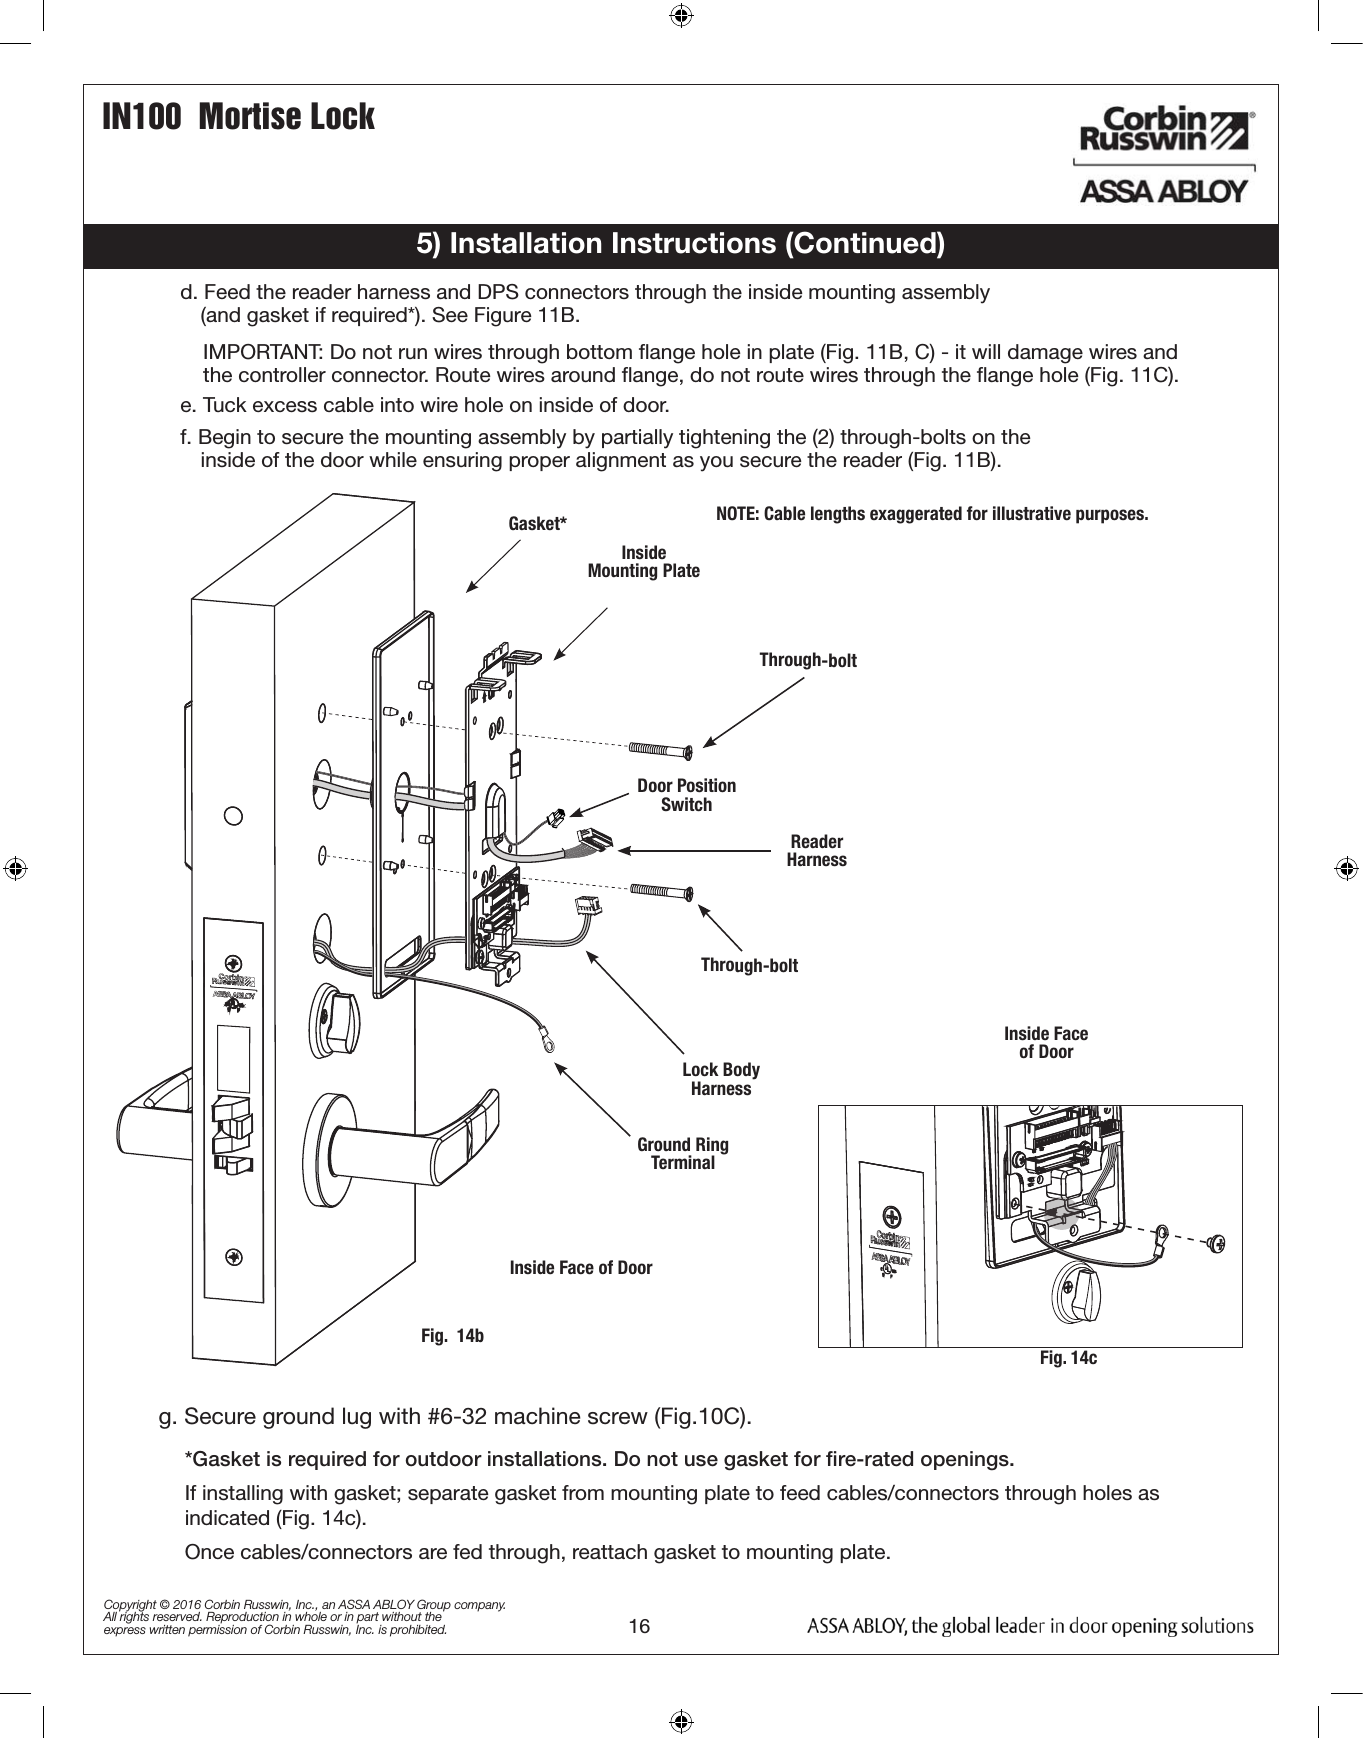 IN100  Mortise Lock16Copyright © 2016 Corbin Russwin, Inc., an ASSA ABLOY Group company. All rights reserved. Reproduction in whole or in part without the express written permission of Corbin Russwin, Inc. is prohibited.5) Installation Instructions (Continued)Fig.  14bGround Ring TerminalLock Body          HarnessThrough-boltReader HarnessThrough-boltInside        Mounting Plate Gasket*Door Position Switch*Gasket is required for outdoor installations. Do not use gasket for ﬁre-rated openings. If installing with gasket; separate gasket from mounting plate to feed cables/connectors through holes as indicated (Fig. 14c). Once cables/connectors are fed through, reattach gasket to mounting plate.NOTE: Cable lengths exaggerated for illustrative purposes.Inside Face of DoorInside Face of DoorFig. 14cg. Secure ground lug with #6-32 machine screw (Fig.10C).d. Feed the reader harness and DPS connectors through the inside mounting assembly                                              (and gasket if required*). See Figure 11B.IMPORTANT: Do not run wires through bottom ﬂange hole in plate (Fig. 11B, C) - it will damage wires and the controller connector. Route wires around ﬂange, do not route wires through the ﬂange hole (Fig. 11C).e. Tuck excess cable into wire hole on inside of door.f. Begin to secure the mounting assembly by partially tightening the (2) through-bolts on the            inside of the door while ensuring proper alignment as you secure the reader (Fig. 11B).